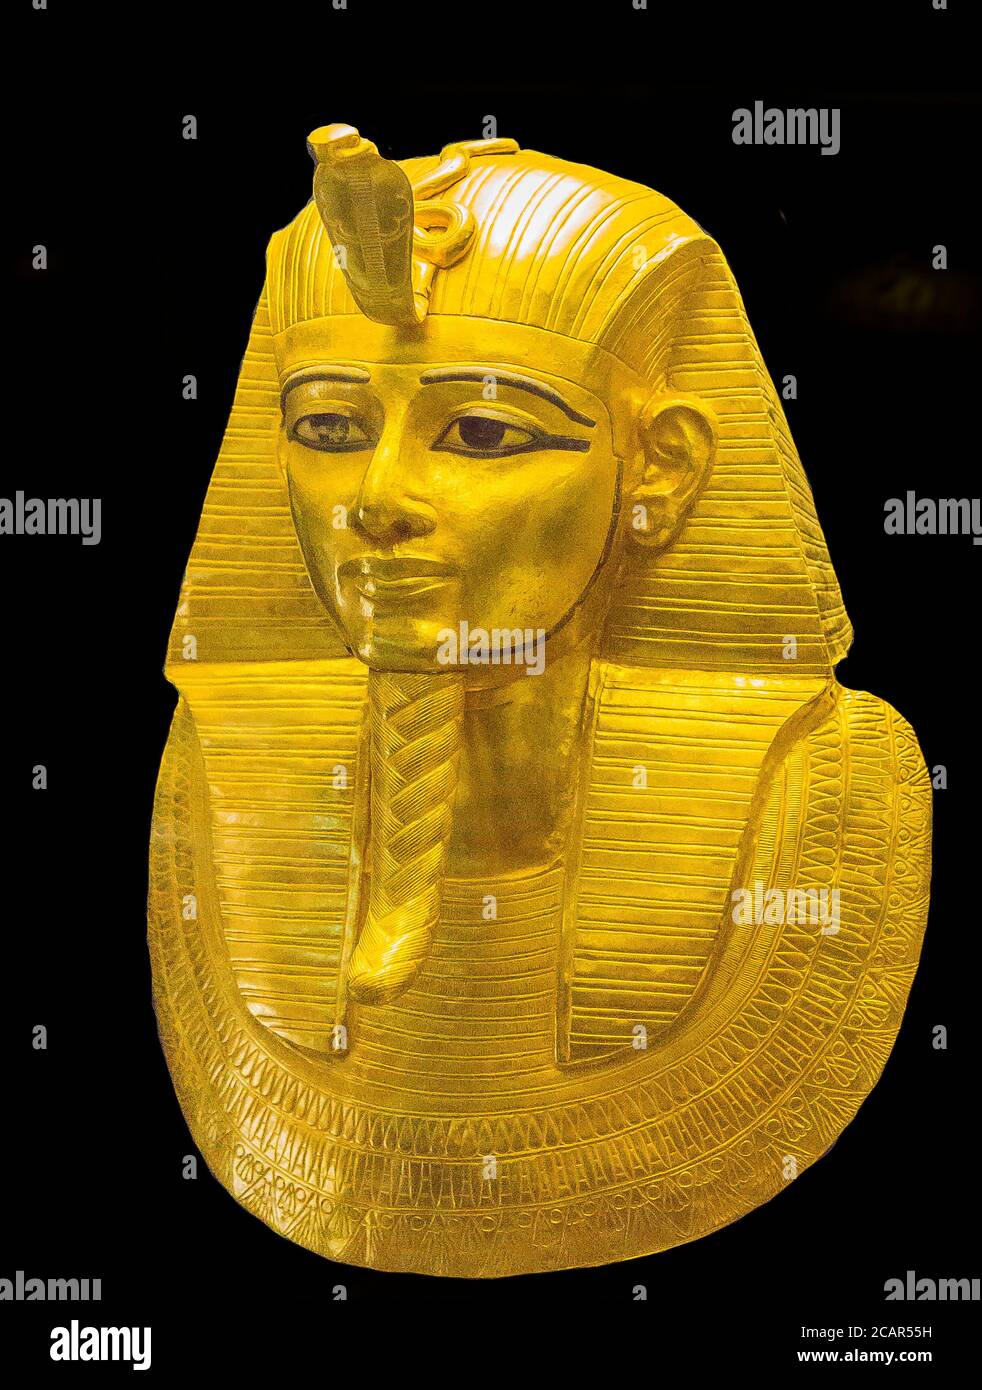 Cairo, Egyptian Museum, royal necropolis of Tanis, burial of the king Psusennes I : Gold mask covering the upper part of the mummy. Stock Photo